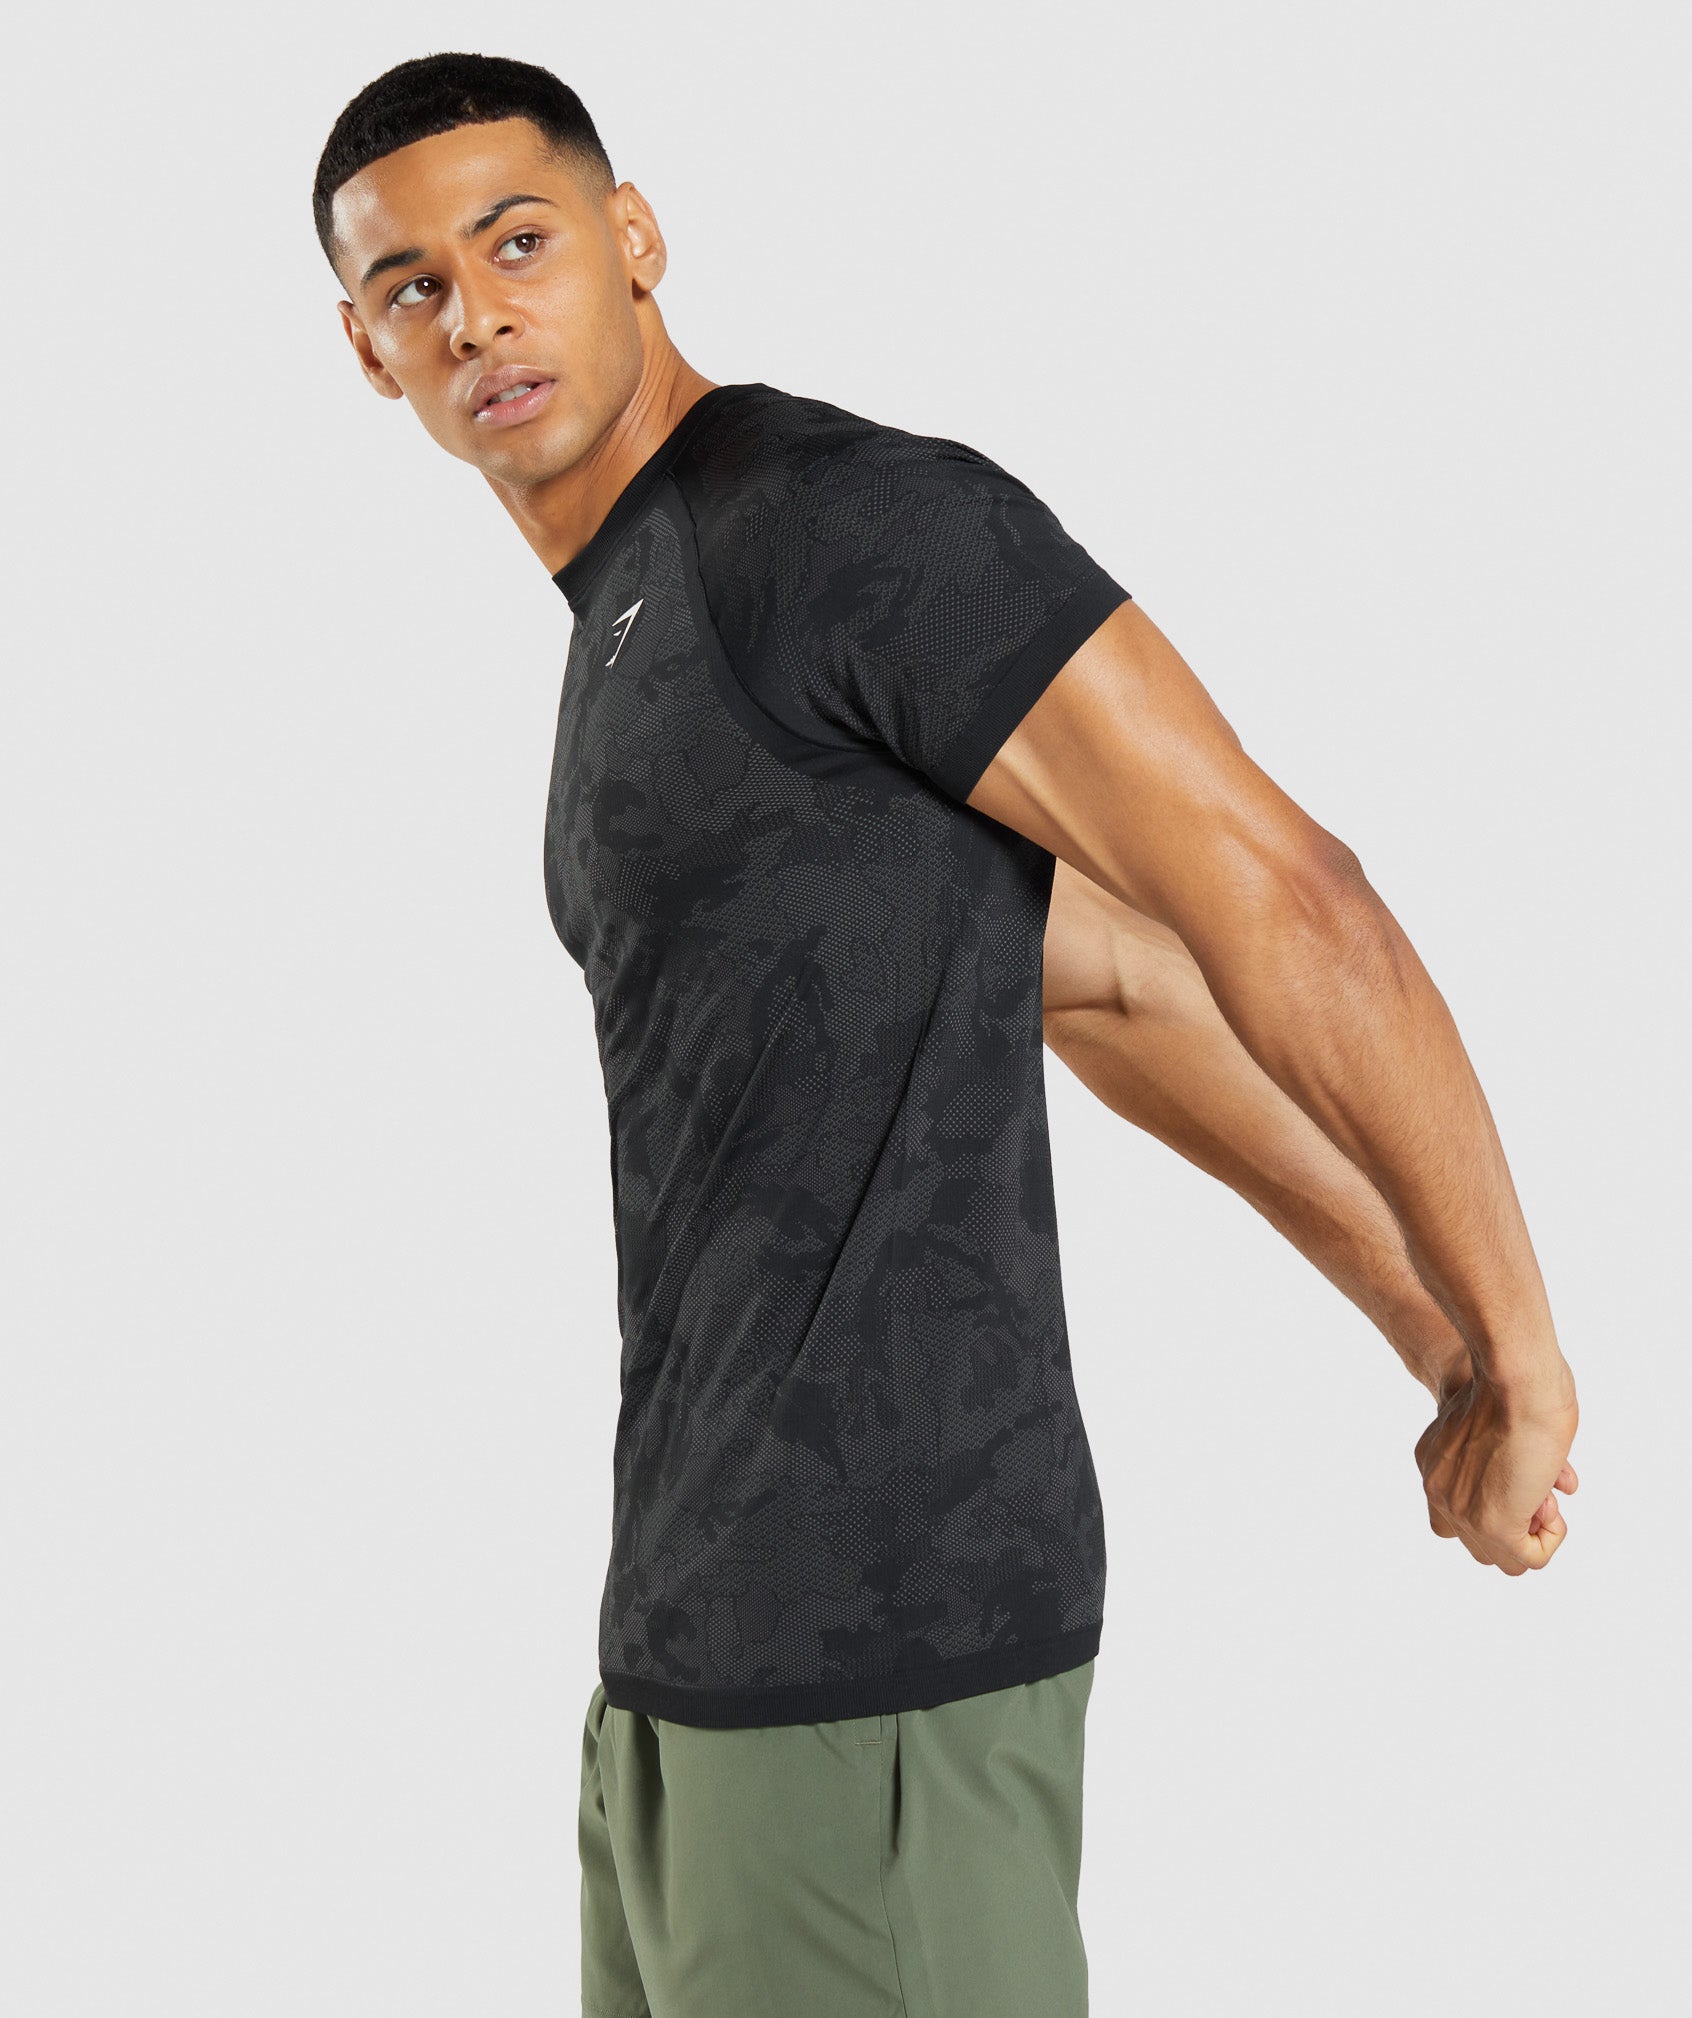 Geo Seamless T-Shirt in Black/Charcoal Grey - view 3